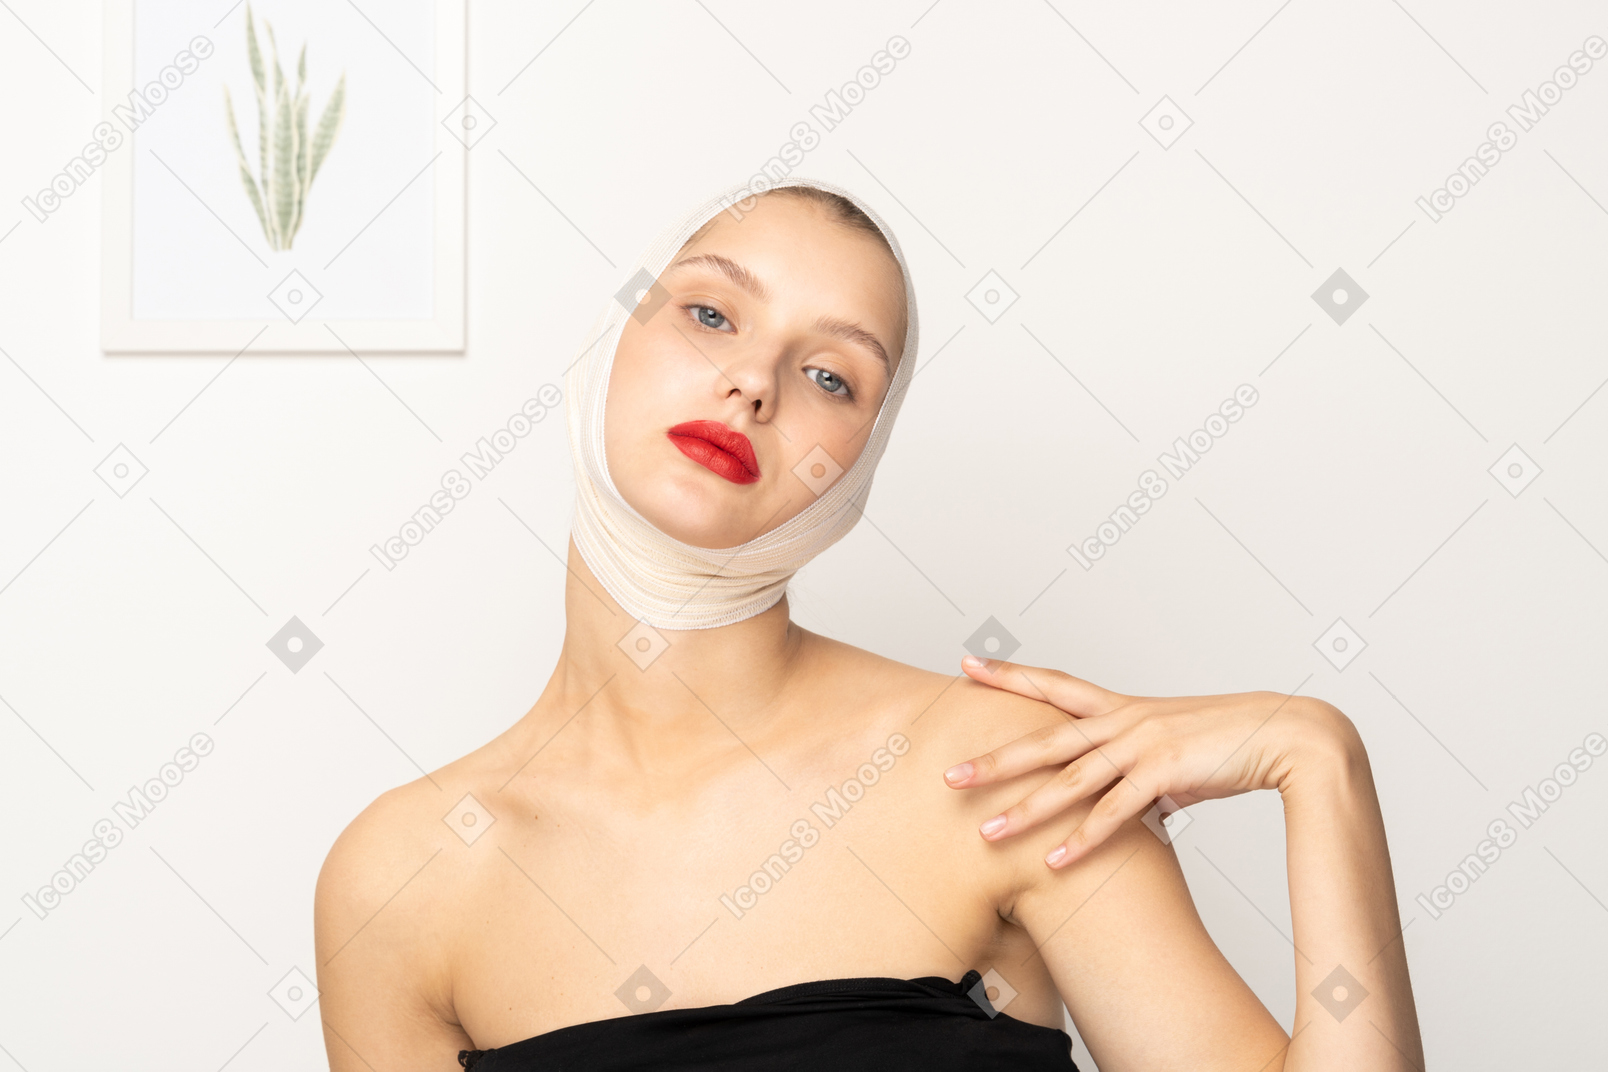 Woman with bandaged head resting hand on shoulder